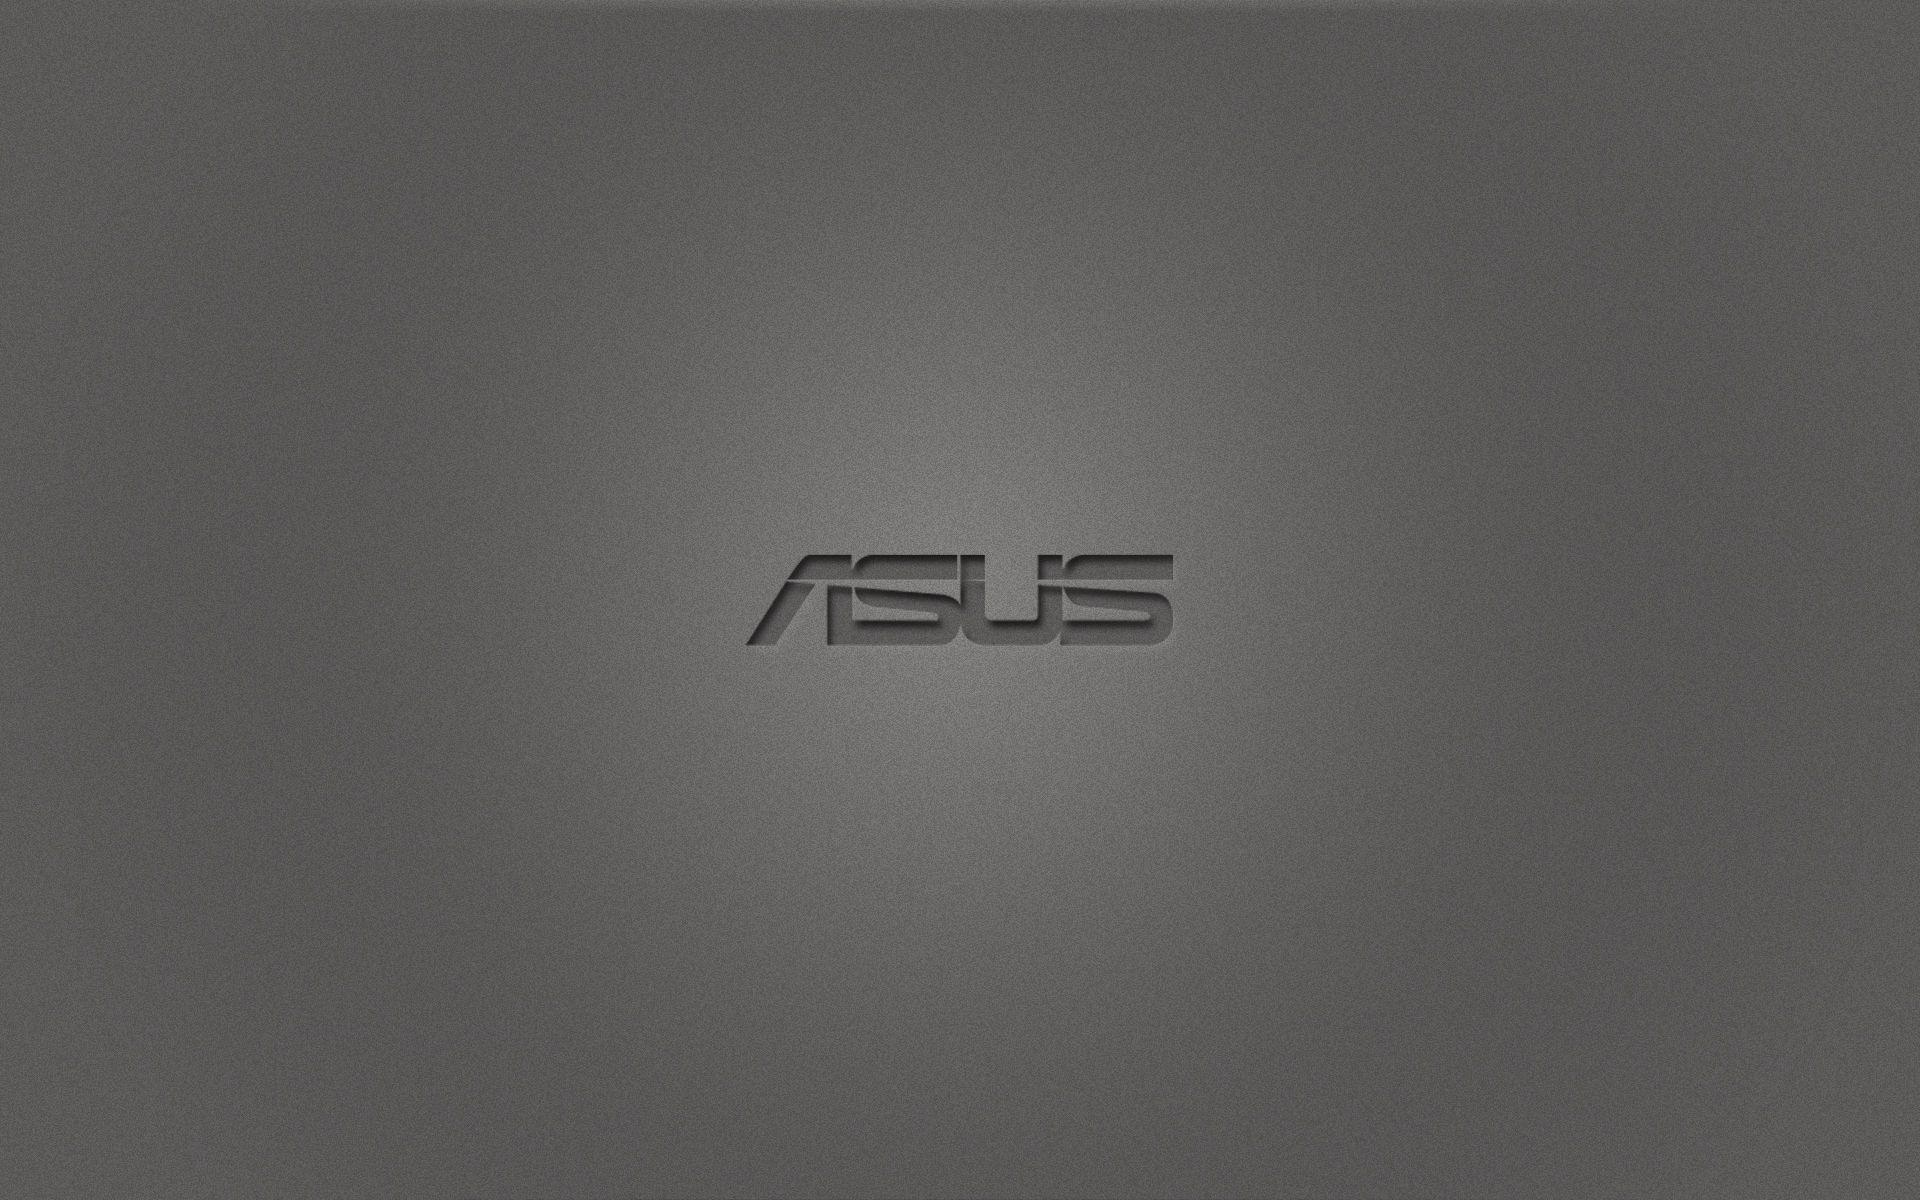 Asus Full HD Wallpaper and Background Imagex1200